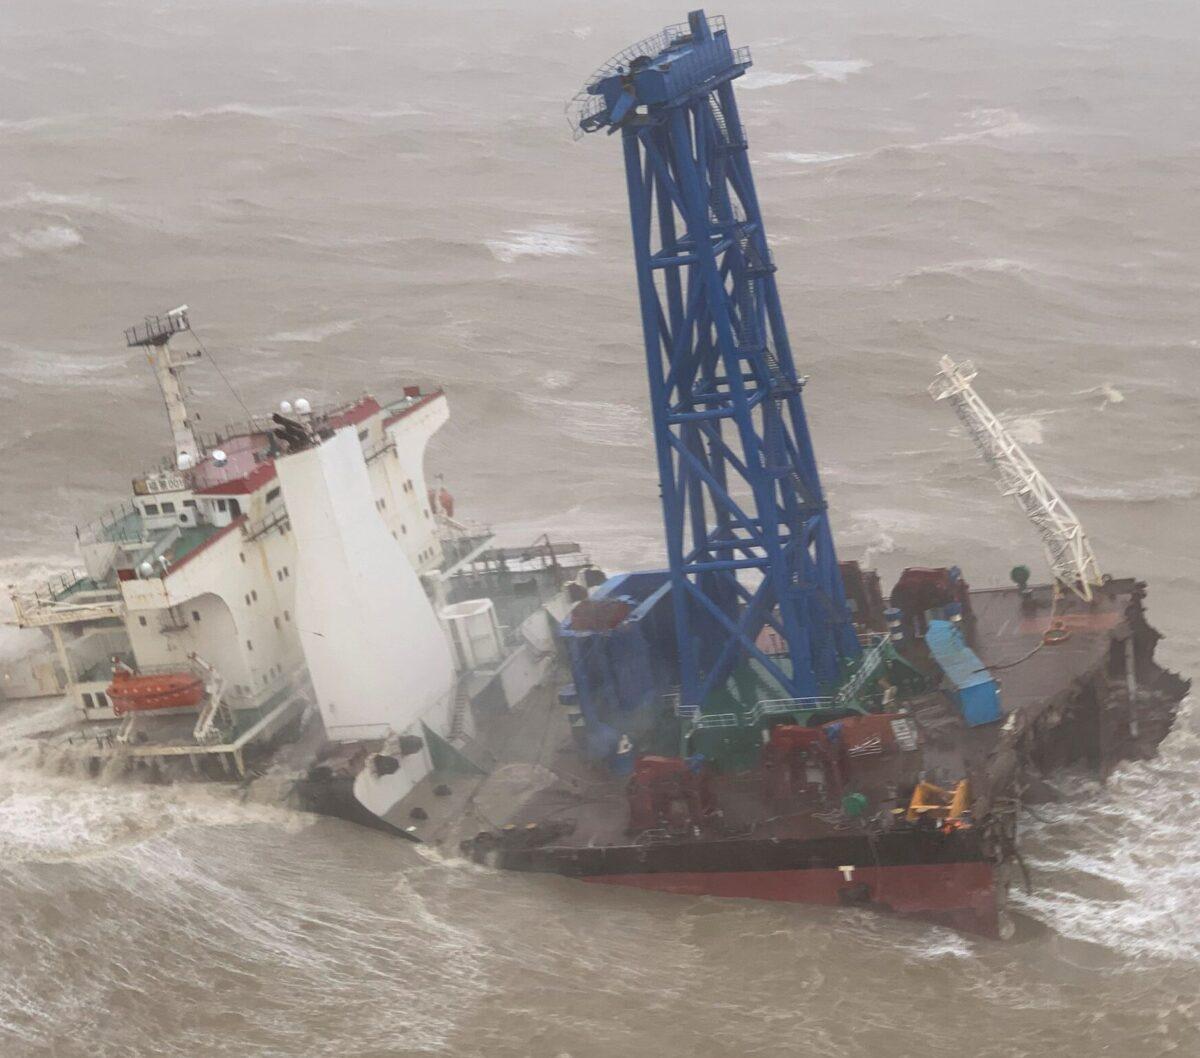 A vessel sinking after it snapped in two as tropical storm Chaba passed through, in waters off Hong Kong on July 2, 2022. (Hong Kong Government Flying Service/Handout via Reuters)